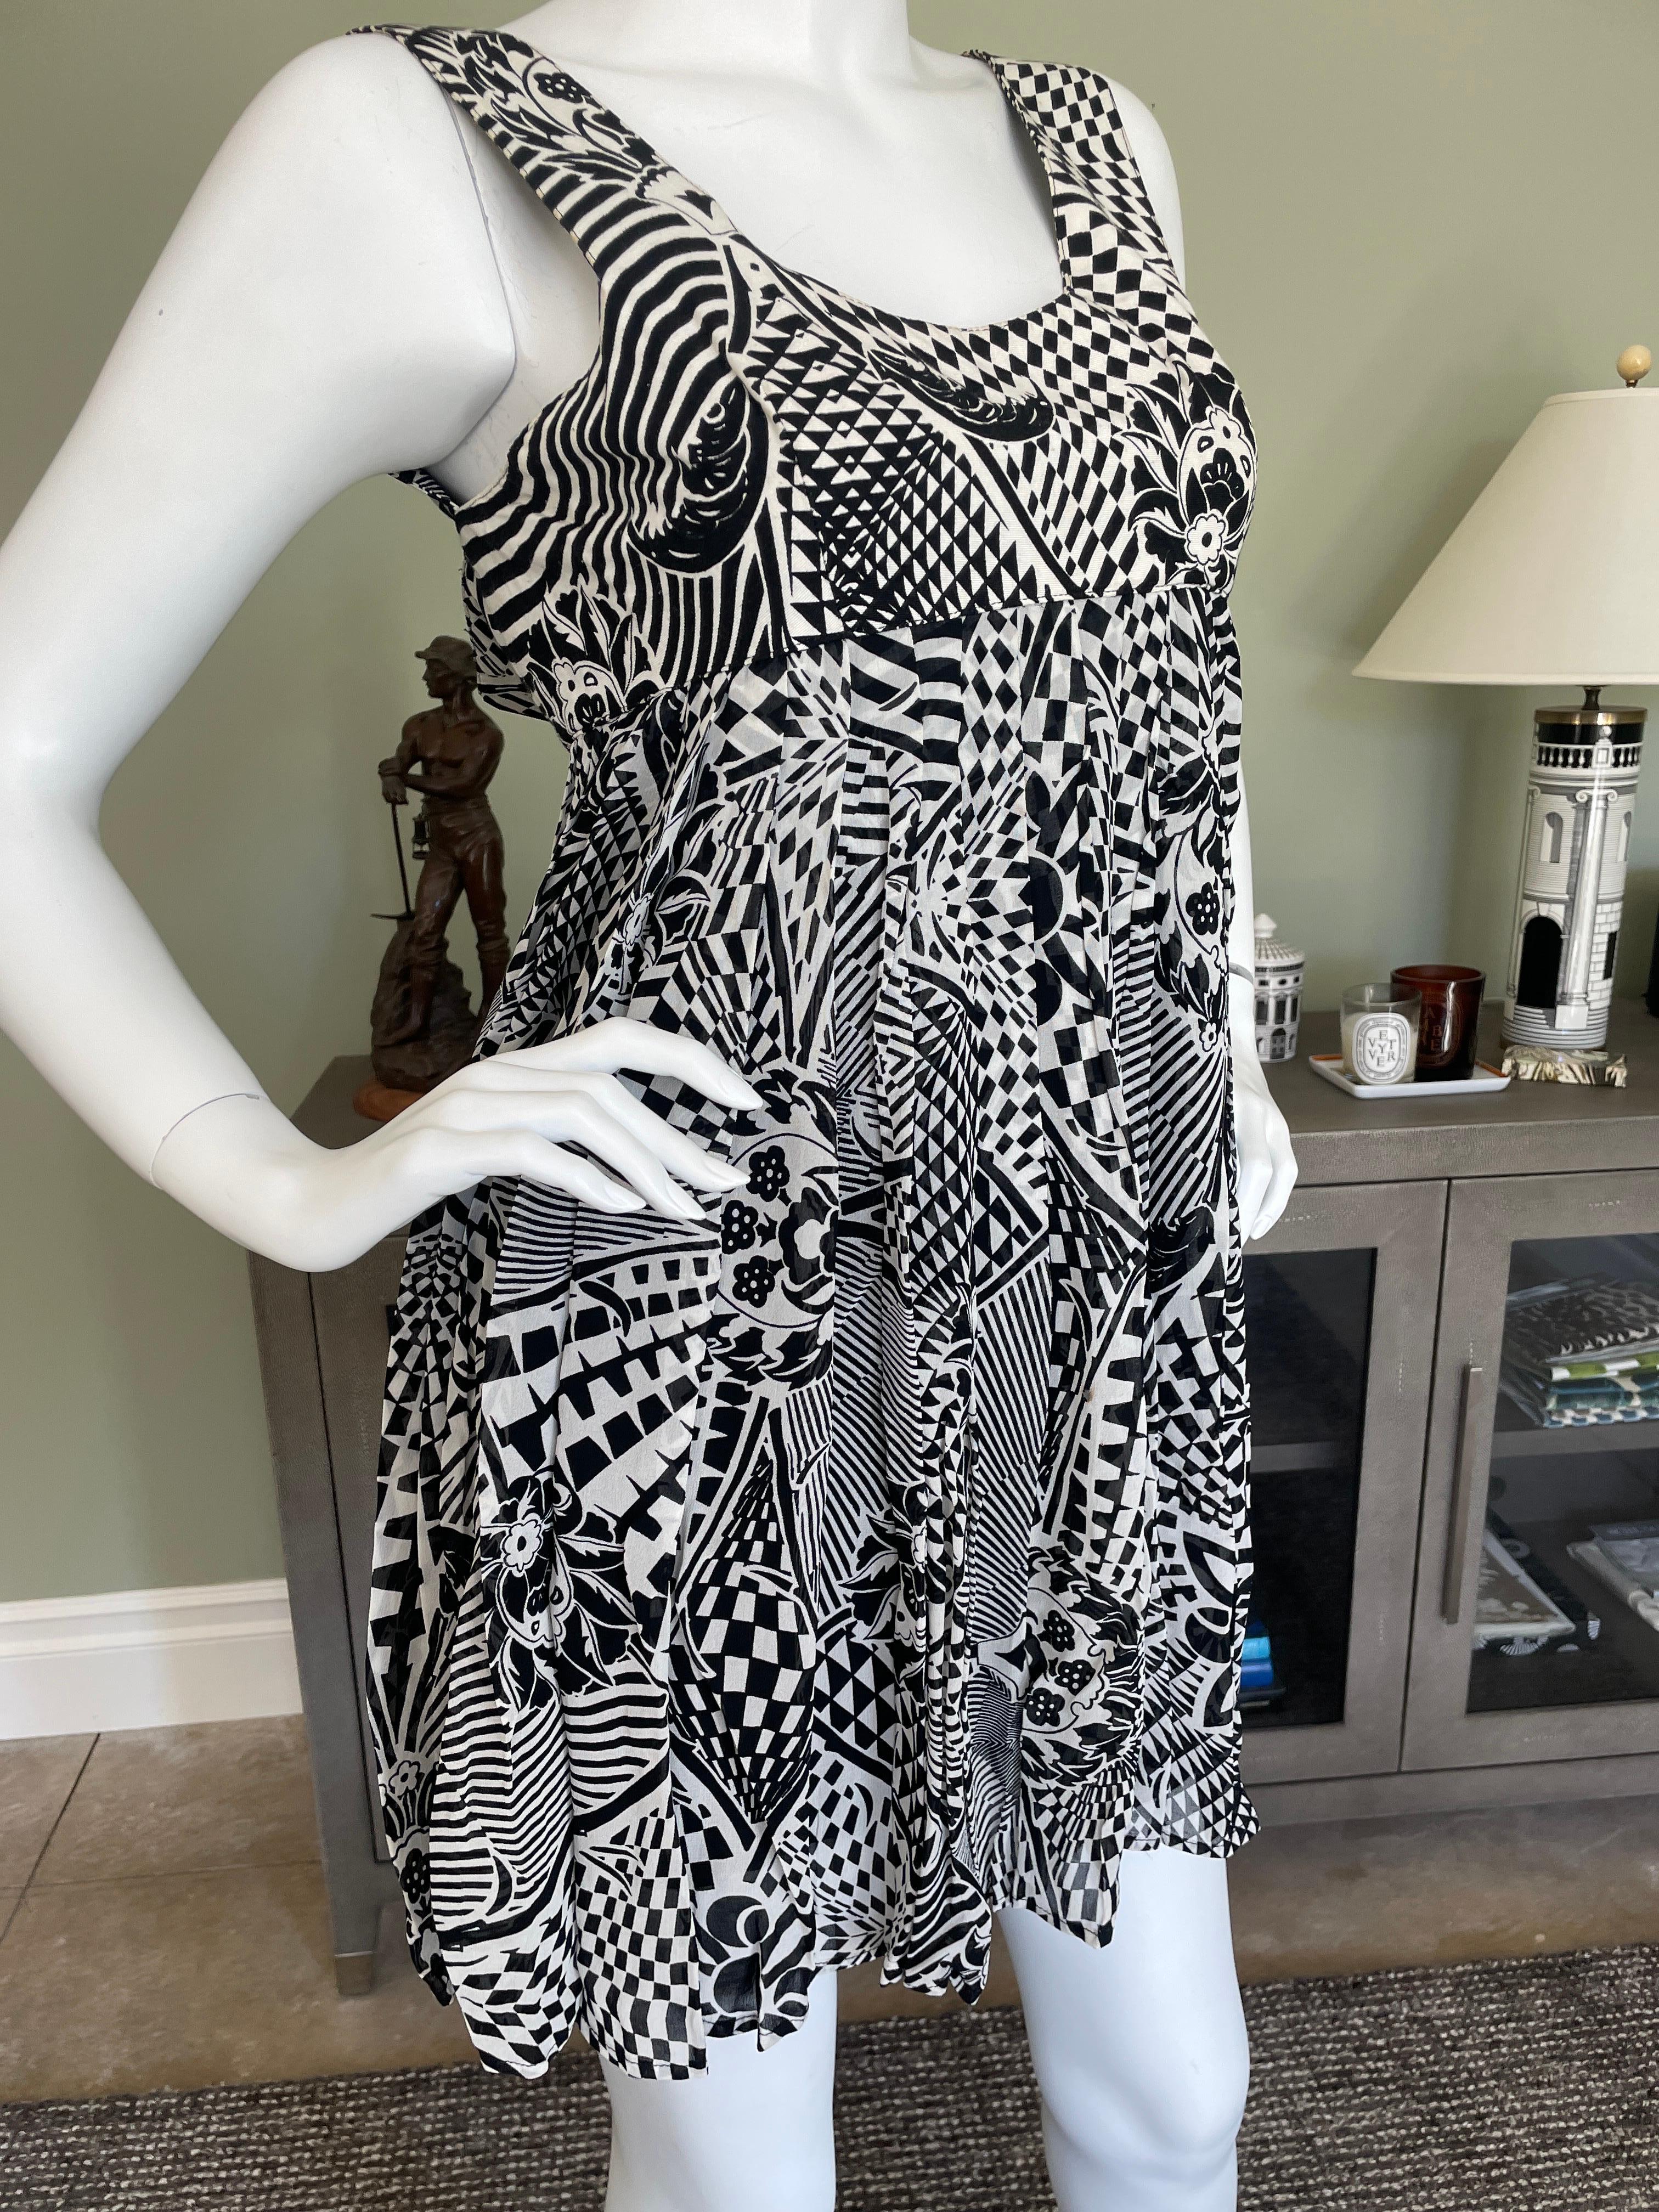 Gianni Versace for Versus Vintage Op Art Baby Doll Dress.'
This would be an excellent maternity dress
Size 40
  Bust 34